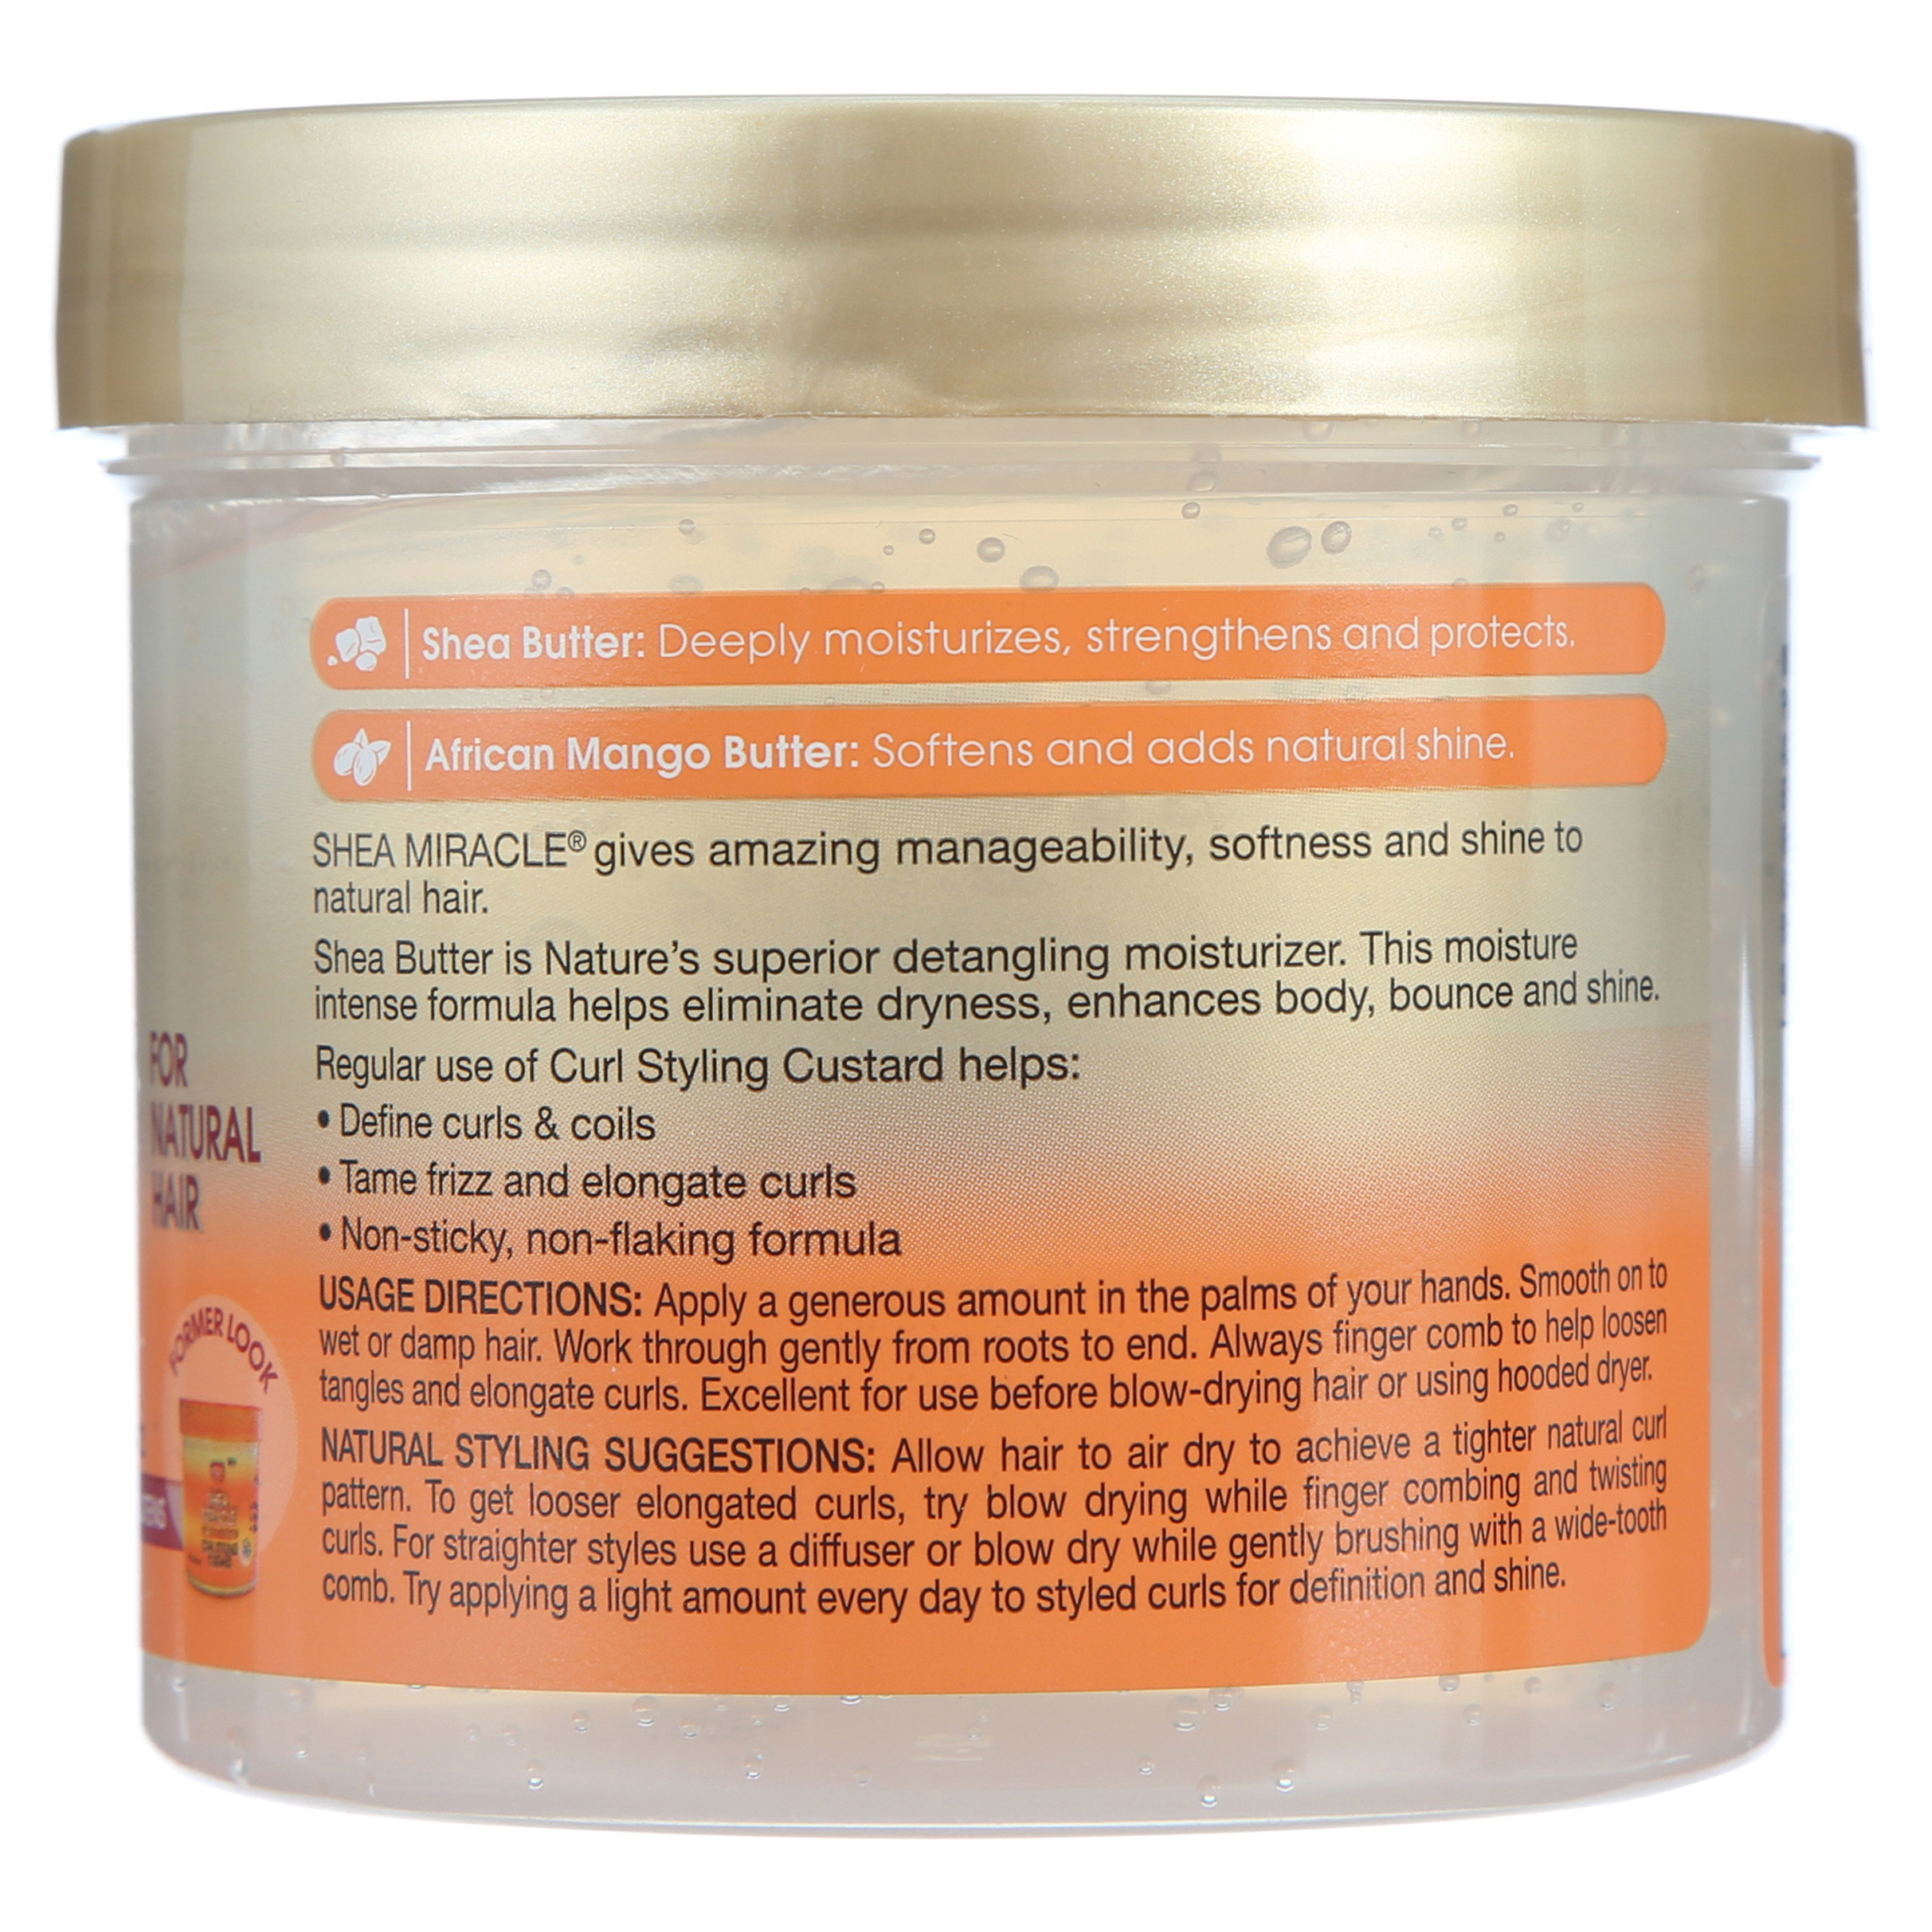 African Pride Curl Styling Cream Custard for Wavy, Curly, Coily Hair with Shea Butter, 12 oz. - image 2 of 5